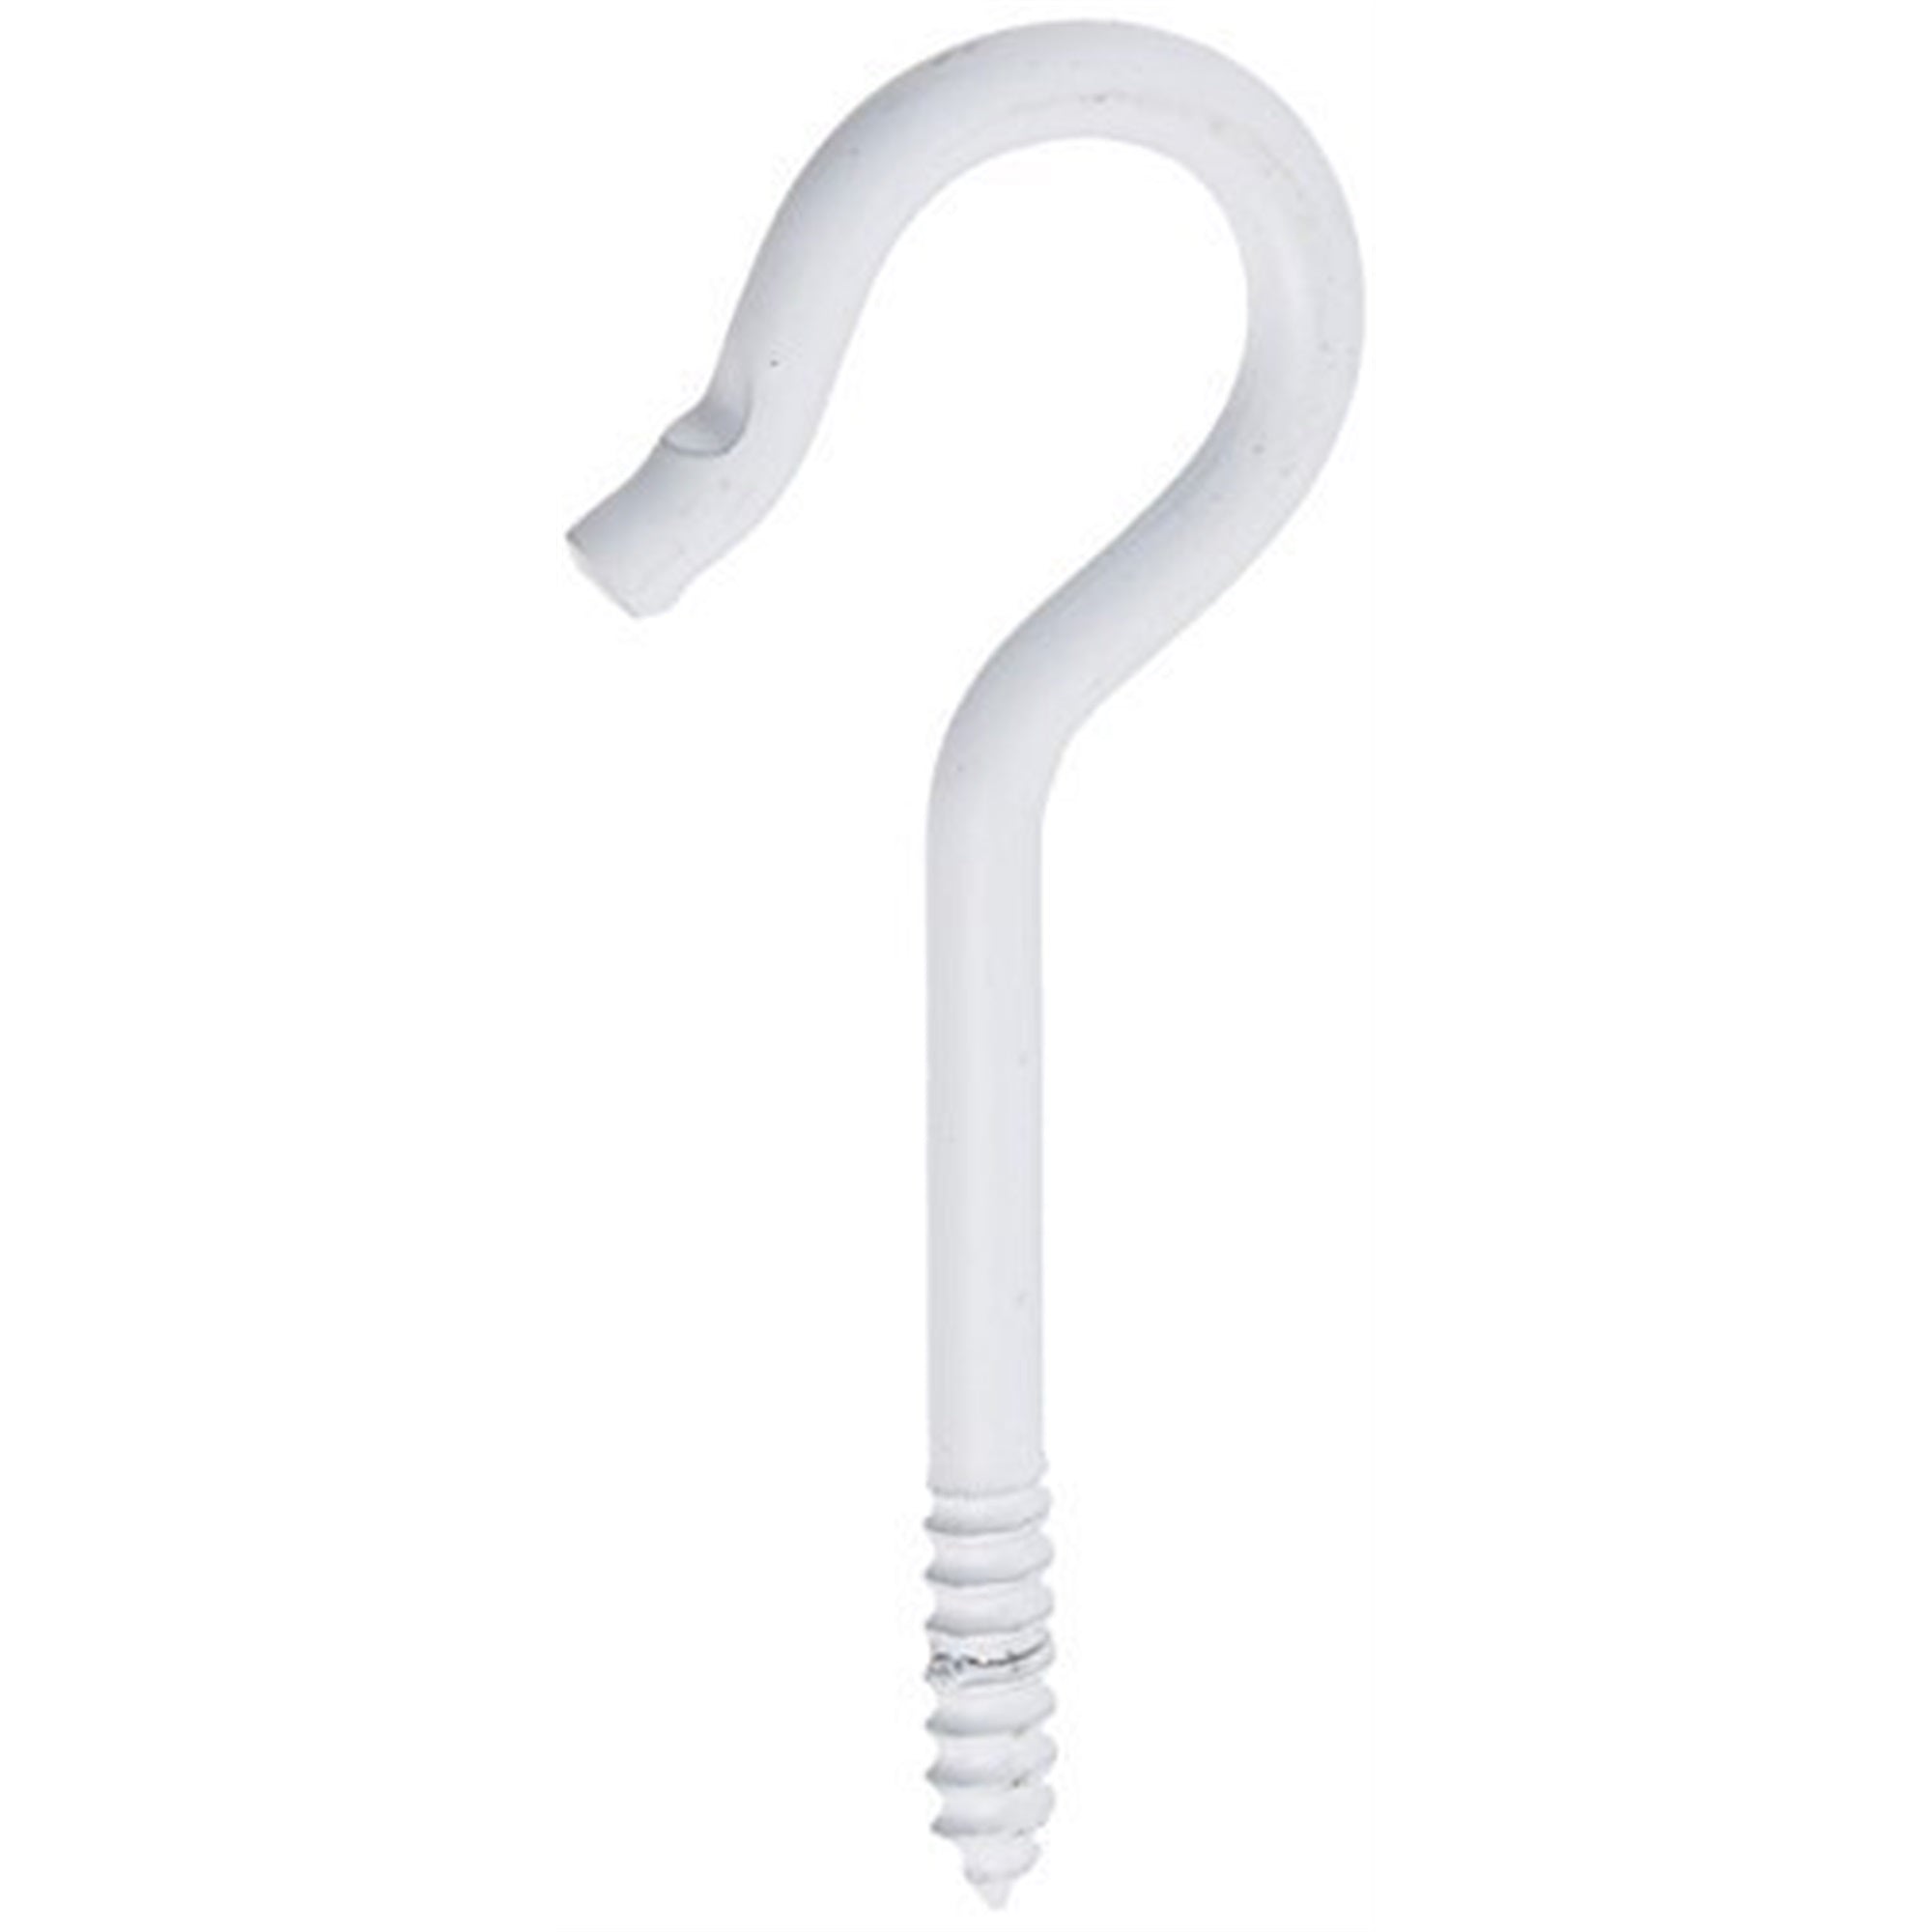 PANACEA PRODUCTS CORP White Ceiling Hooks, 5 Pack